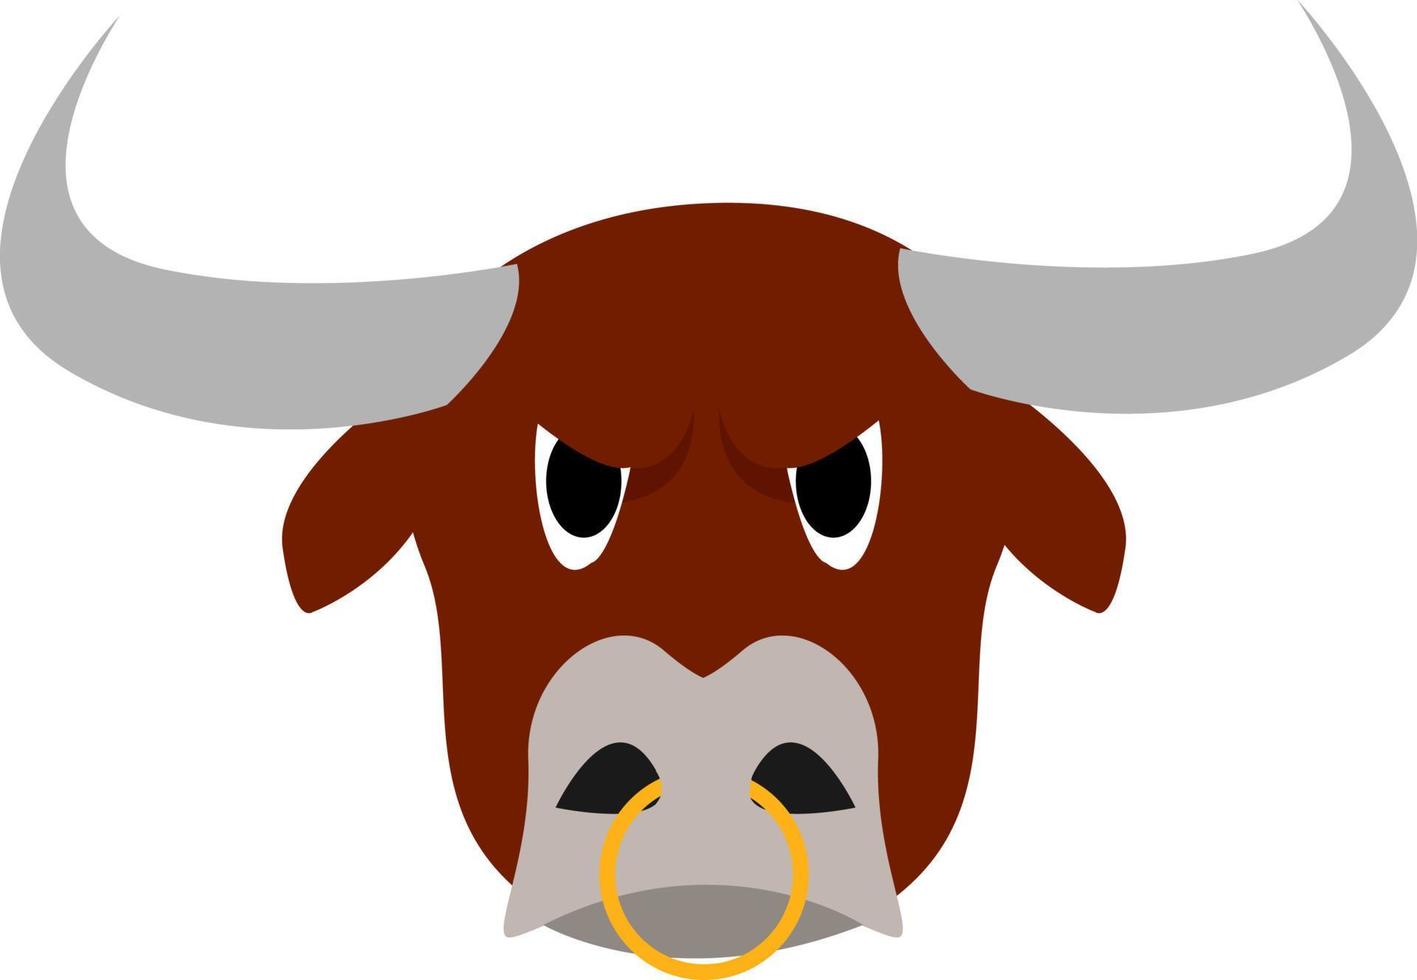 Angry bull, illustration, vector on white background.